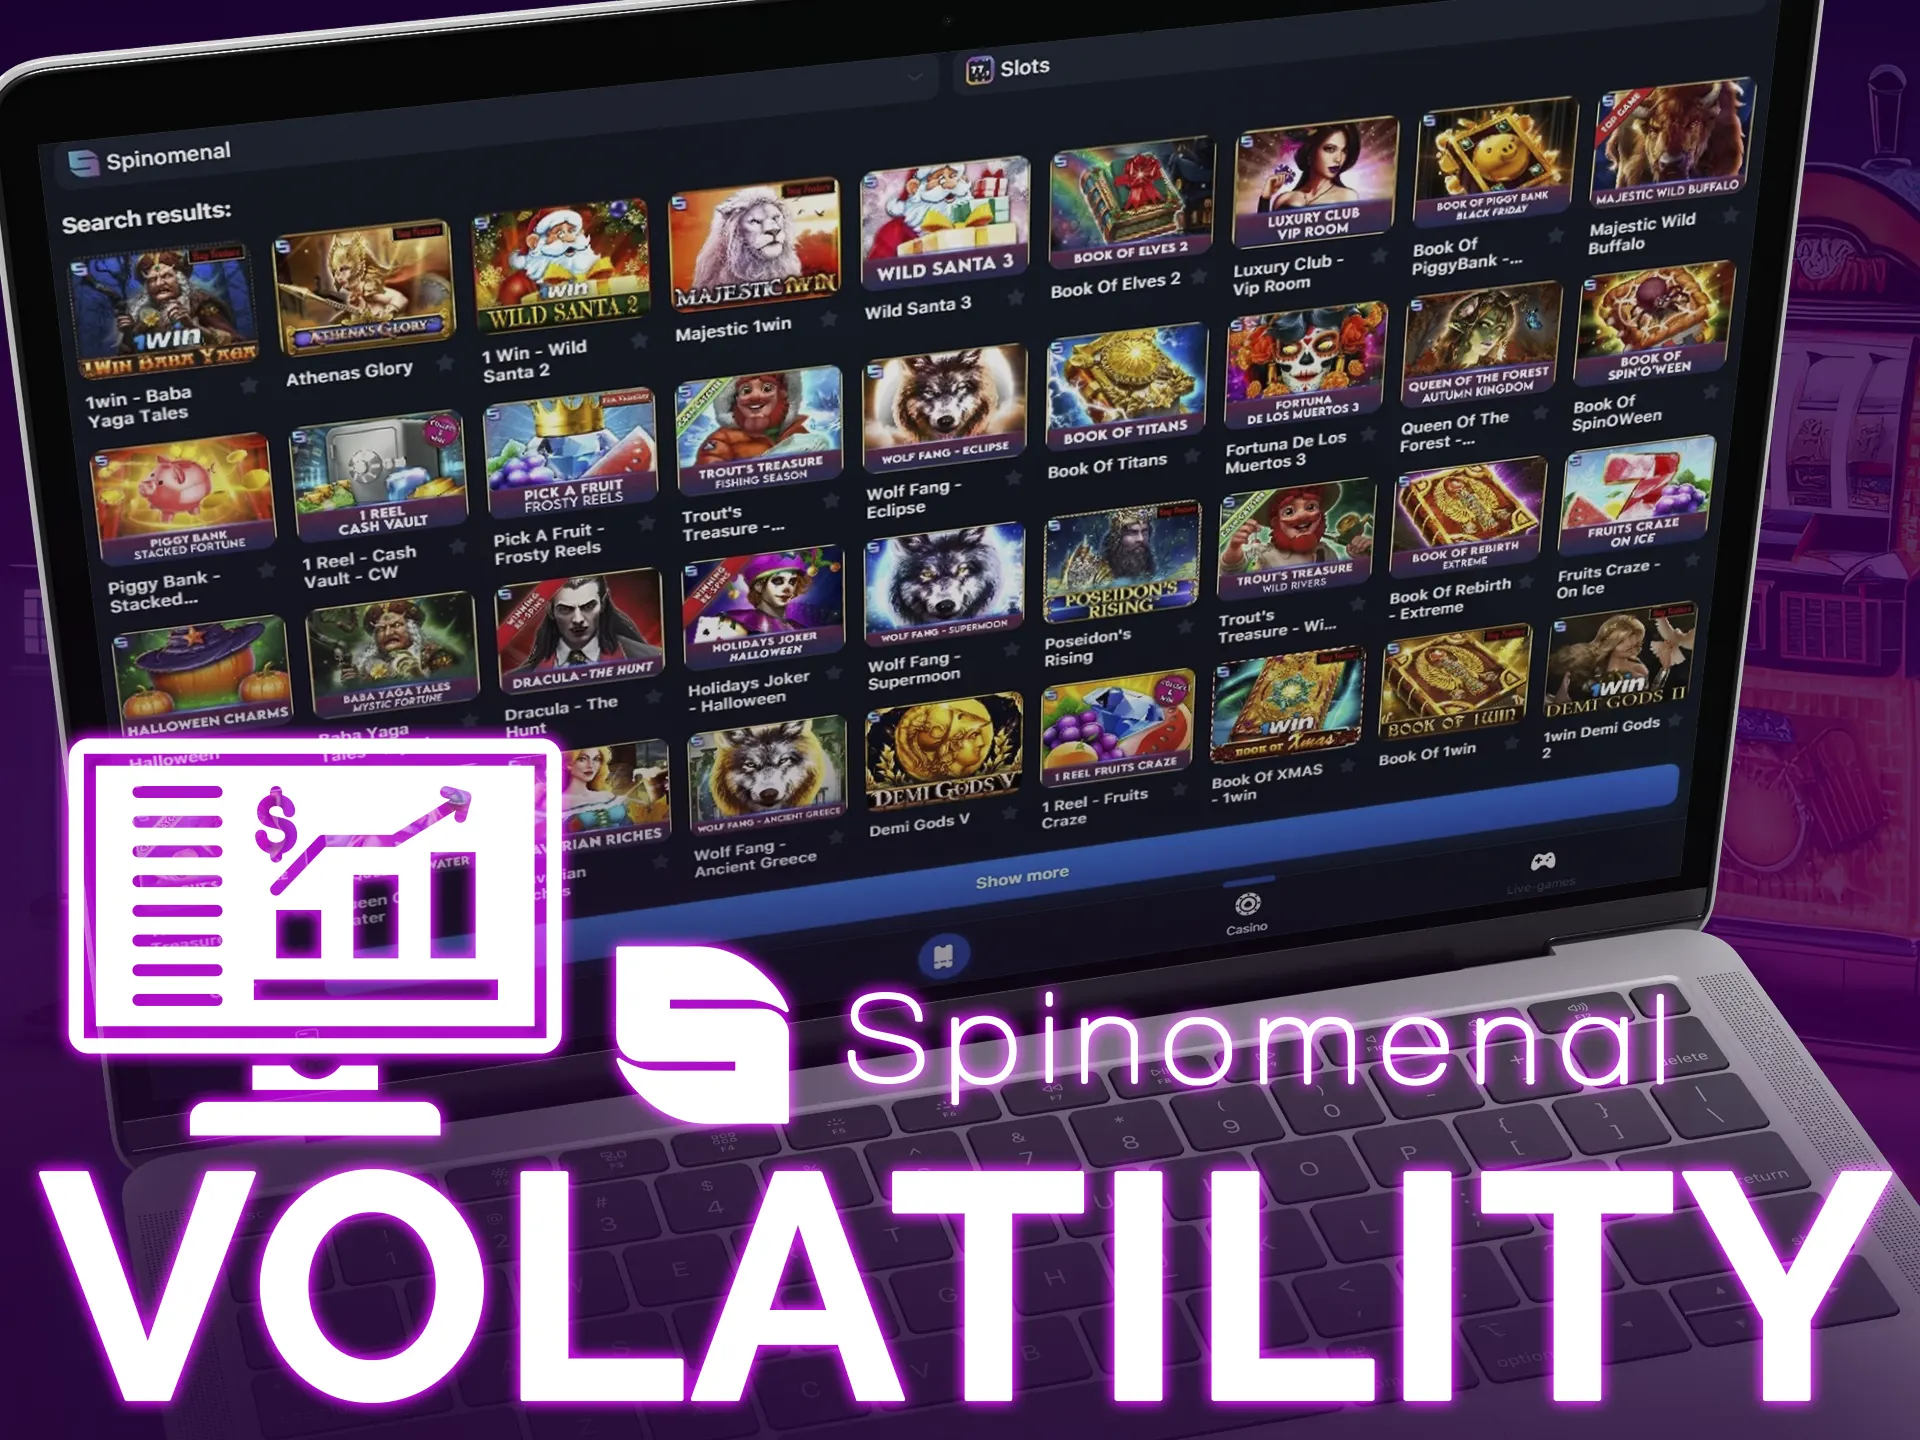 High volatility Spinomenal slots: Story of Alice, Book Of Rebirth, Trout's Treasure.